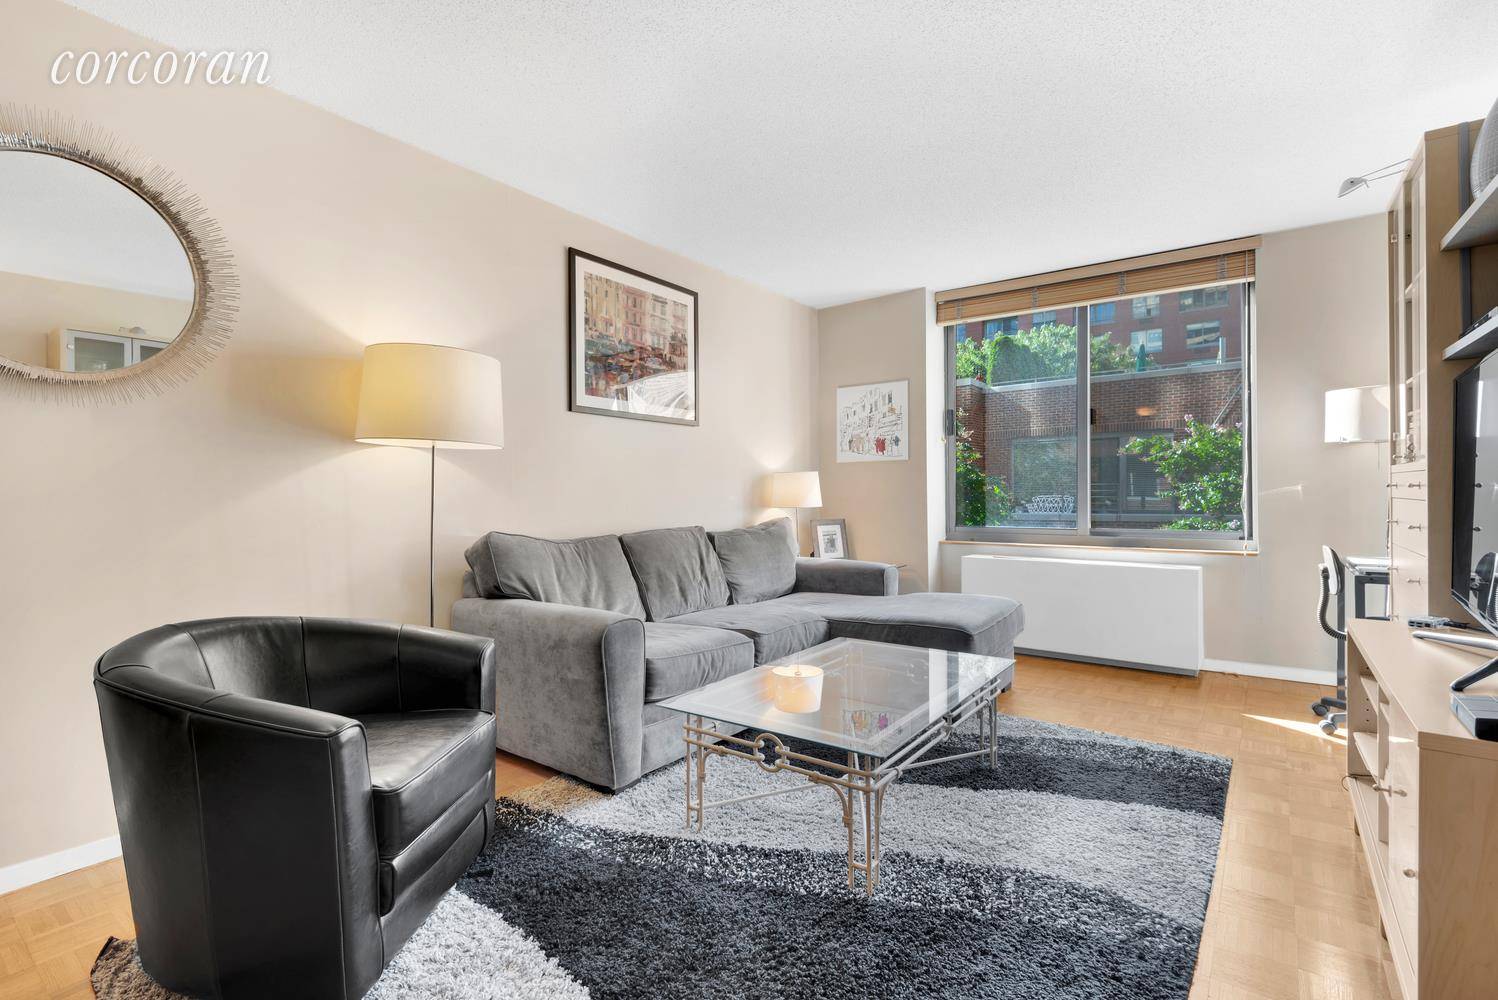 Welcome to this large one bedroom with serene views to the lush garden courtyard on a quiet cul de sac in Battery Park City !